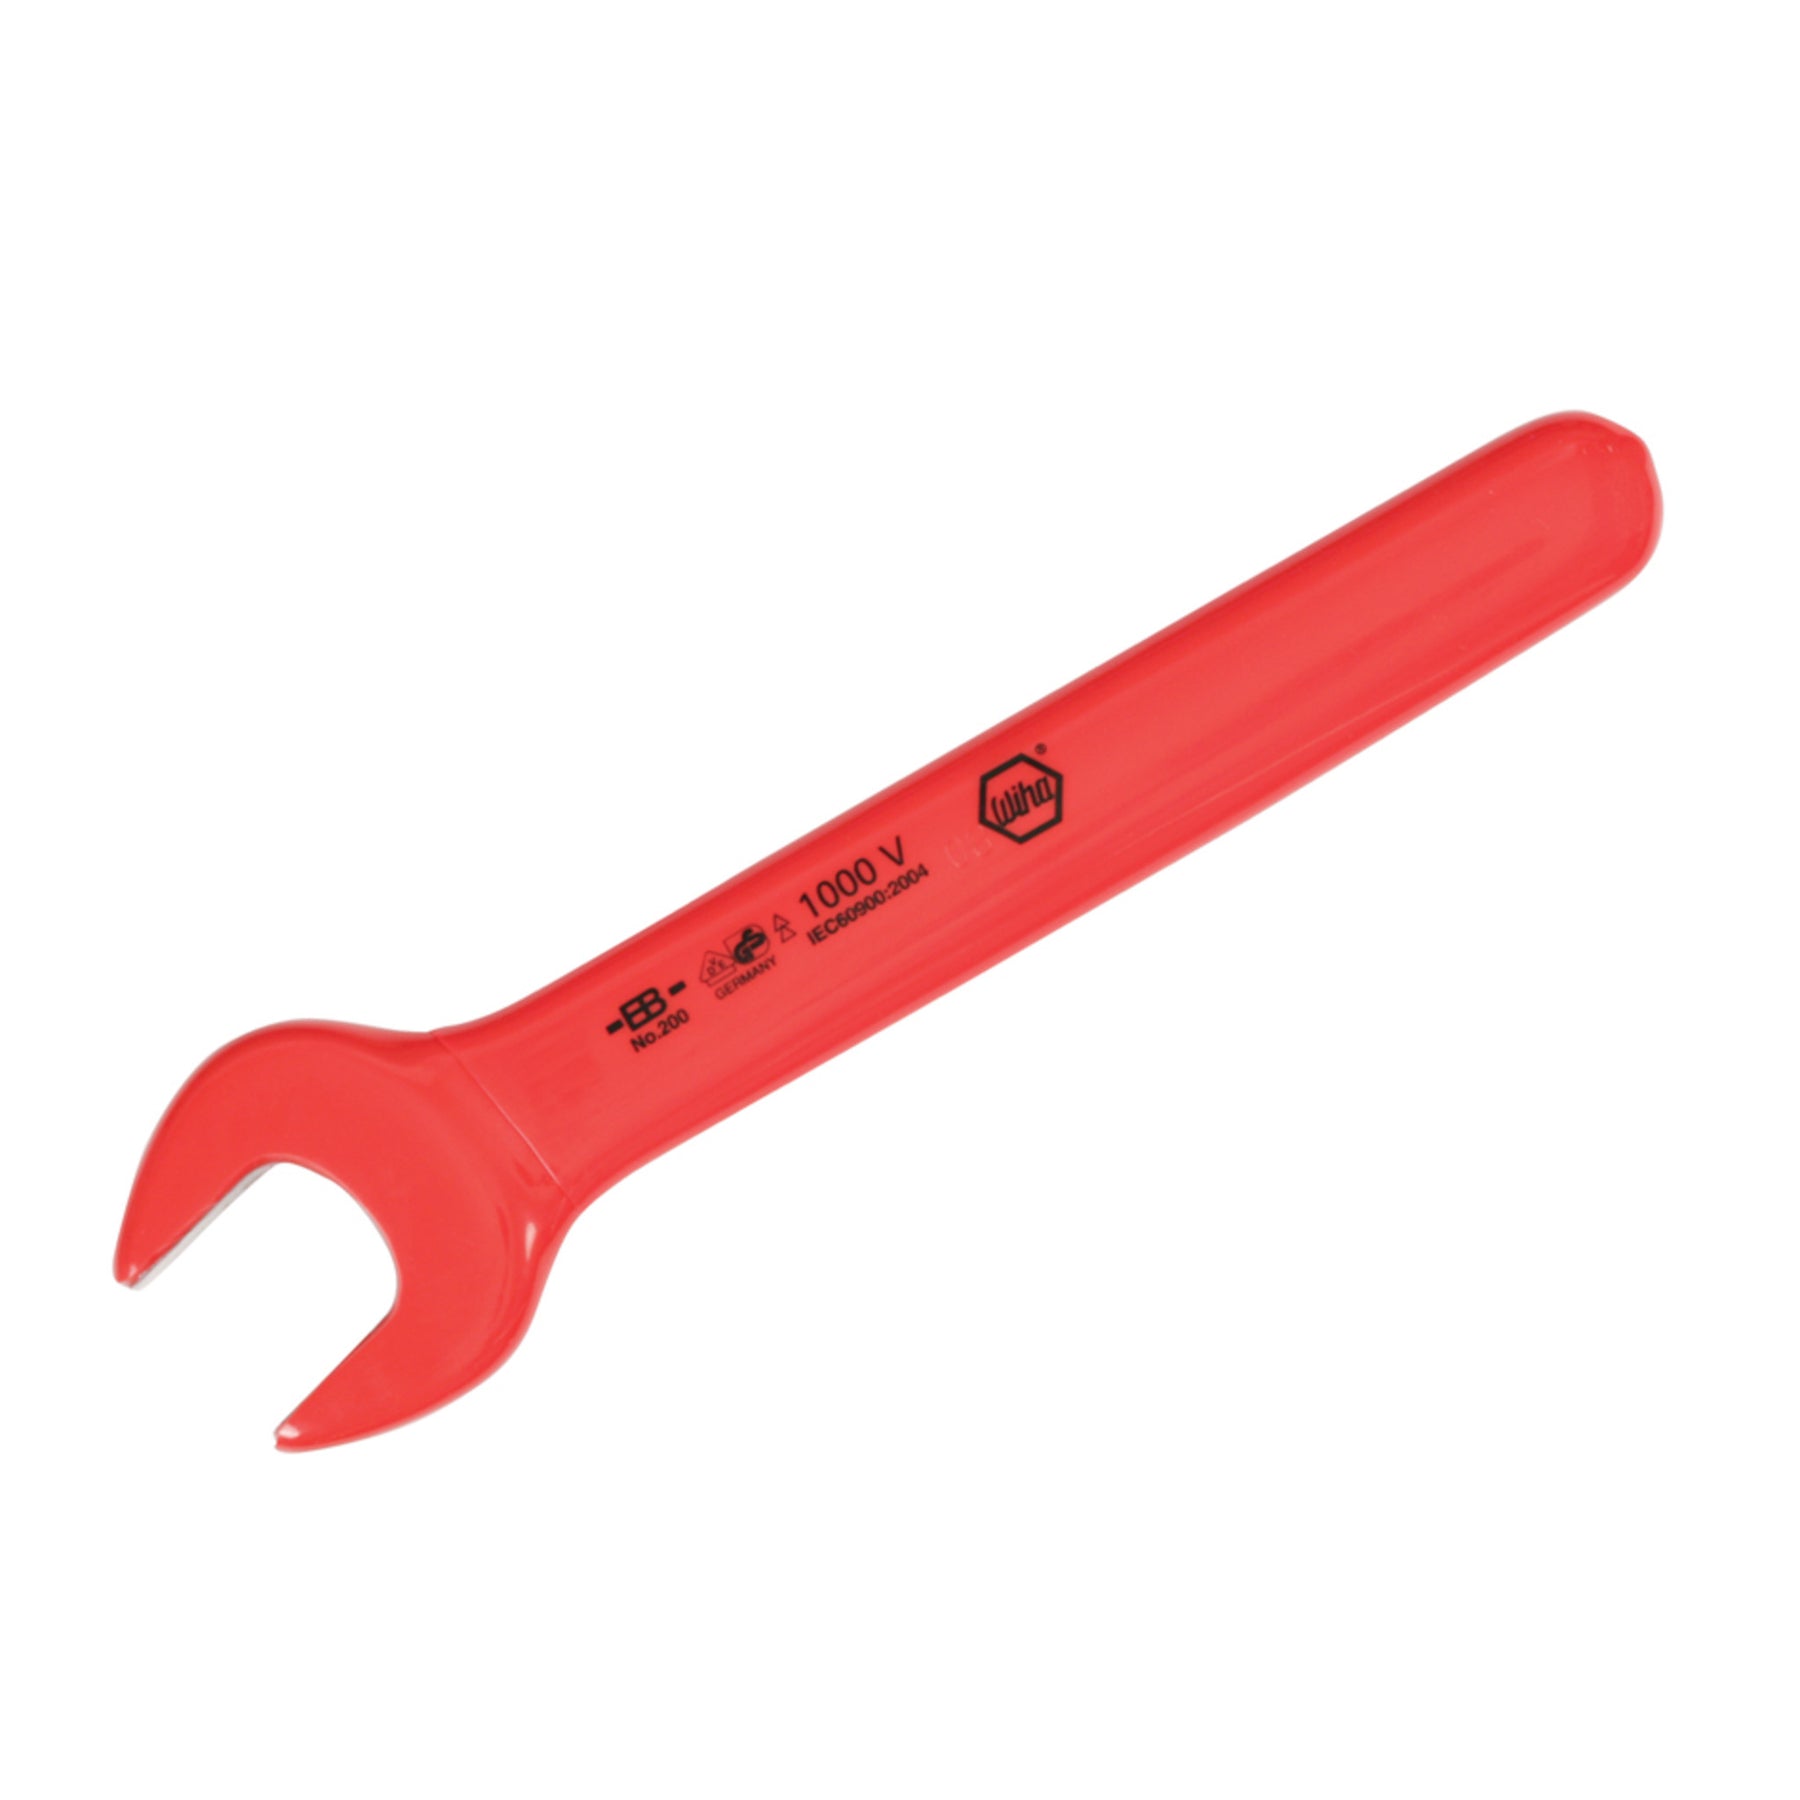 Wiha 20019 Insulated Open End Wrench 19.0mm